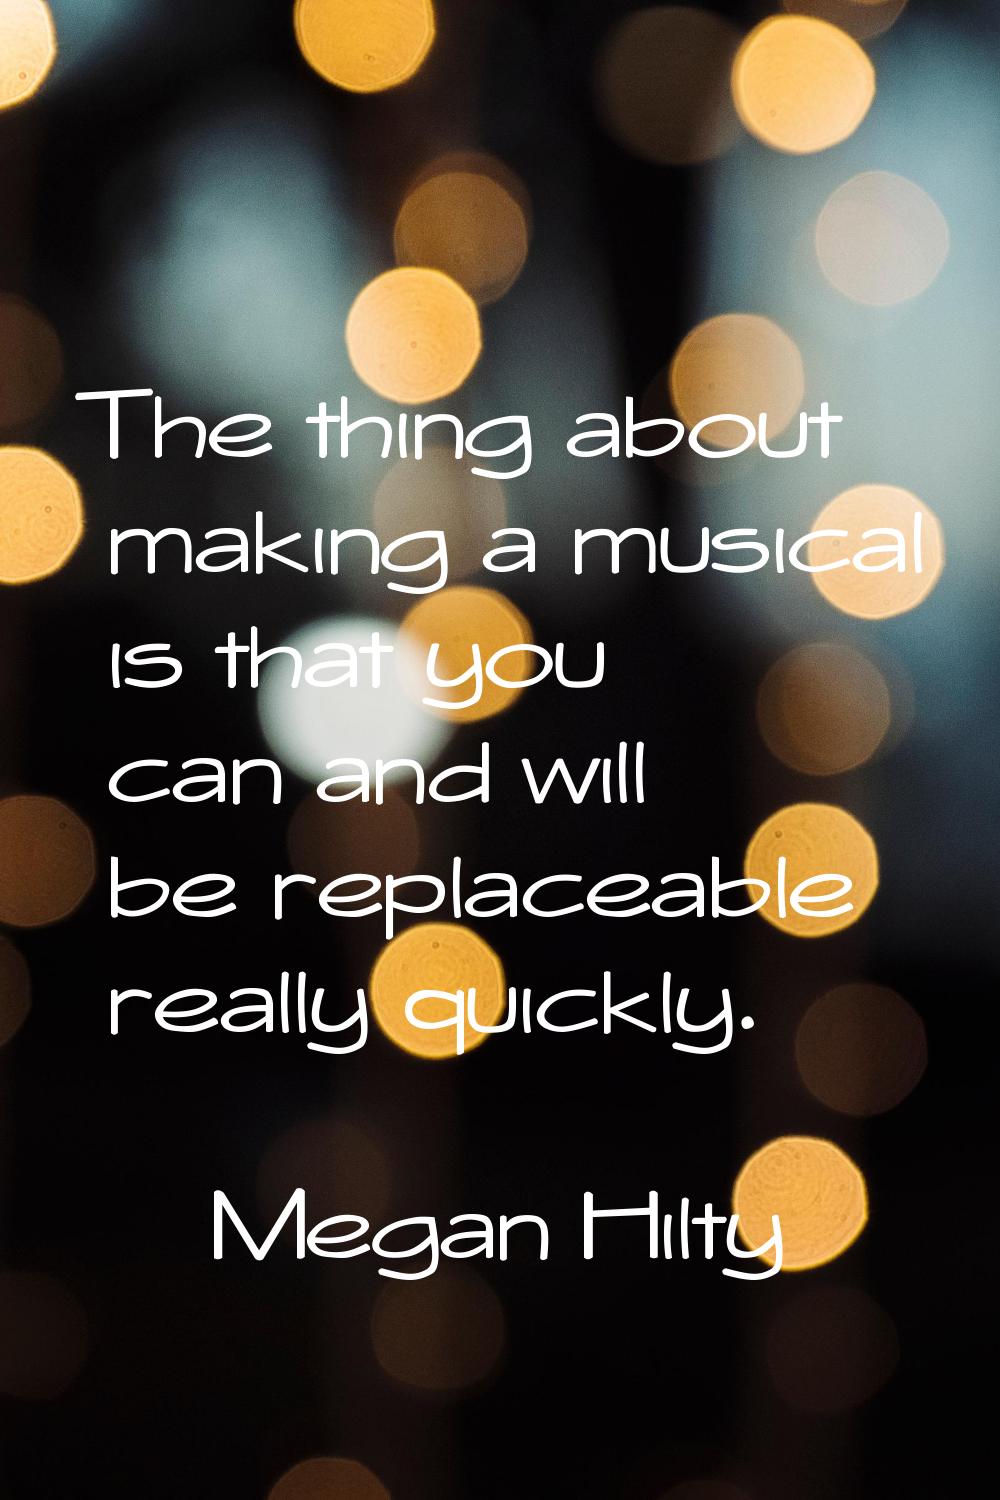 The thing about making a musical is that you can and will be replaceable really quickly.